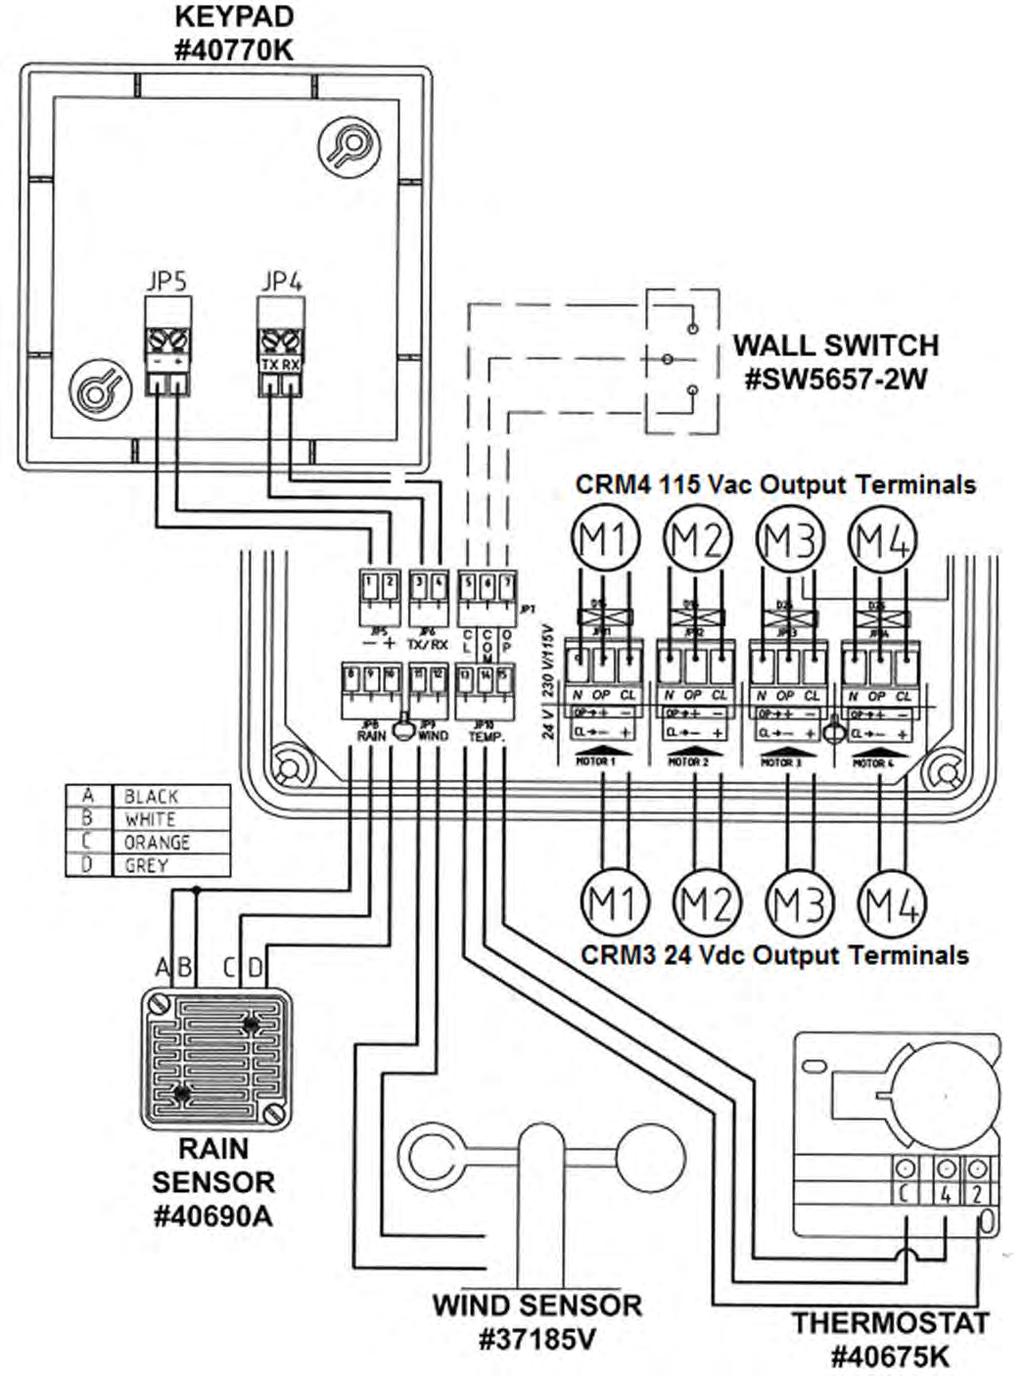 Control Panel Internal Sample Wiring Diagram A CONNECTION SPECIFICATIONS SHOWN ARE GENERIC AND NOT PROJECT SPECIFIC.